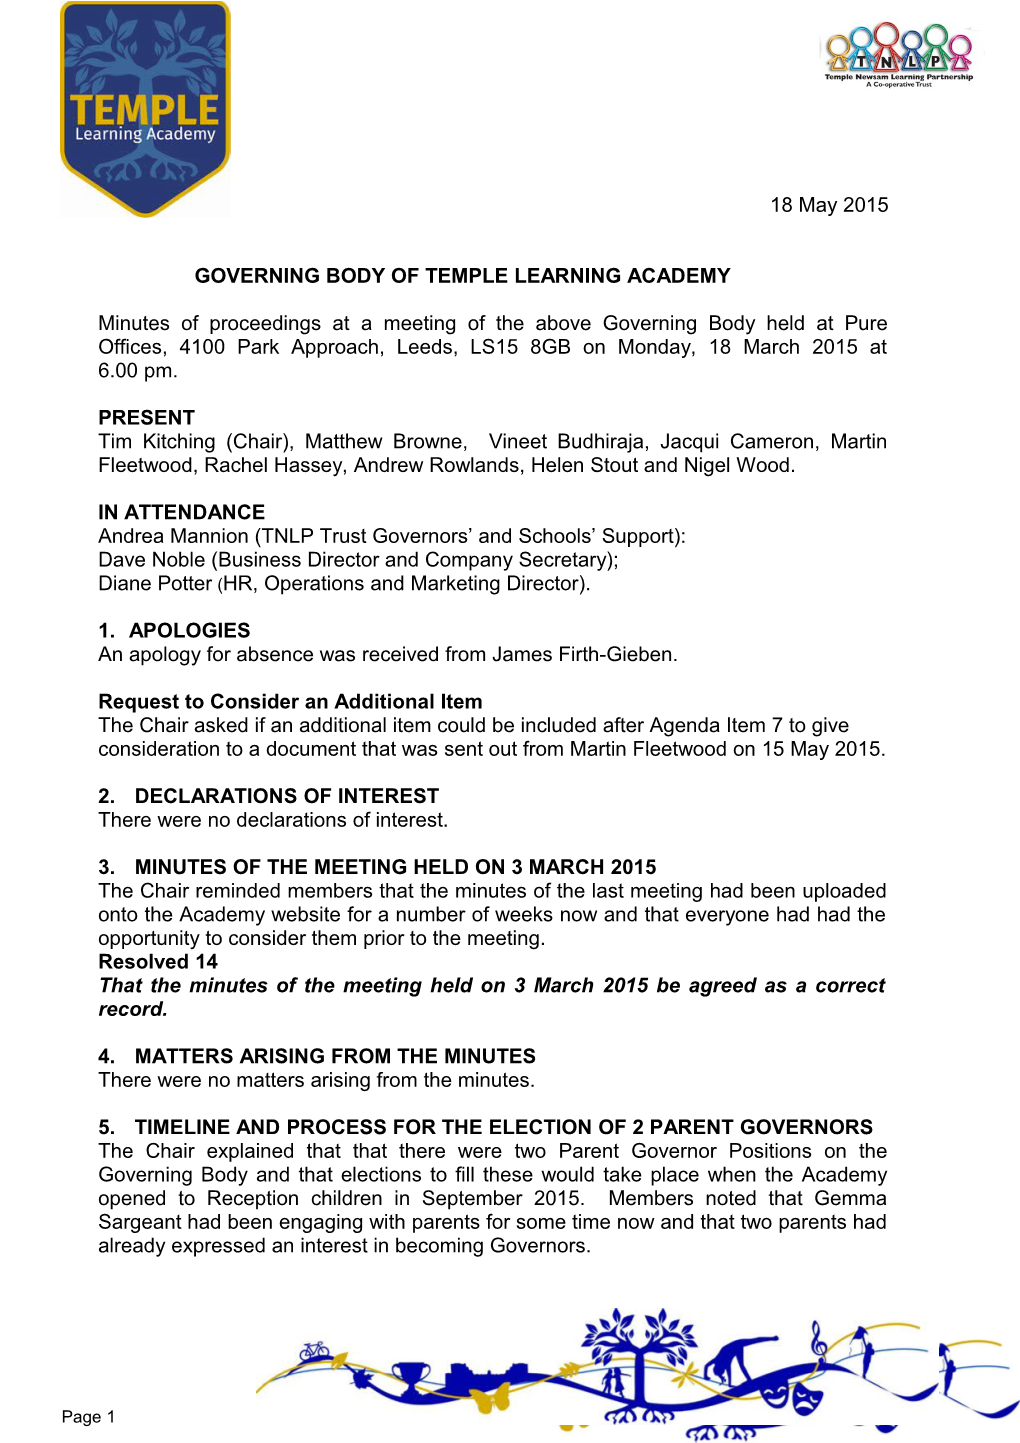 Governing Body of Temple Learning Academy